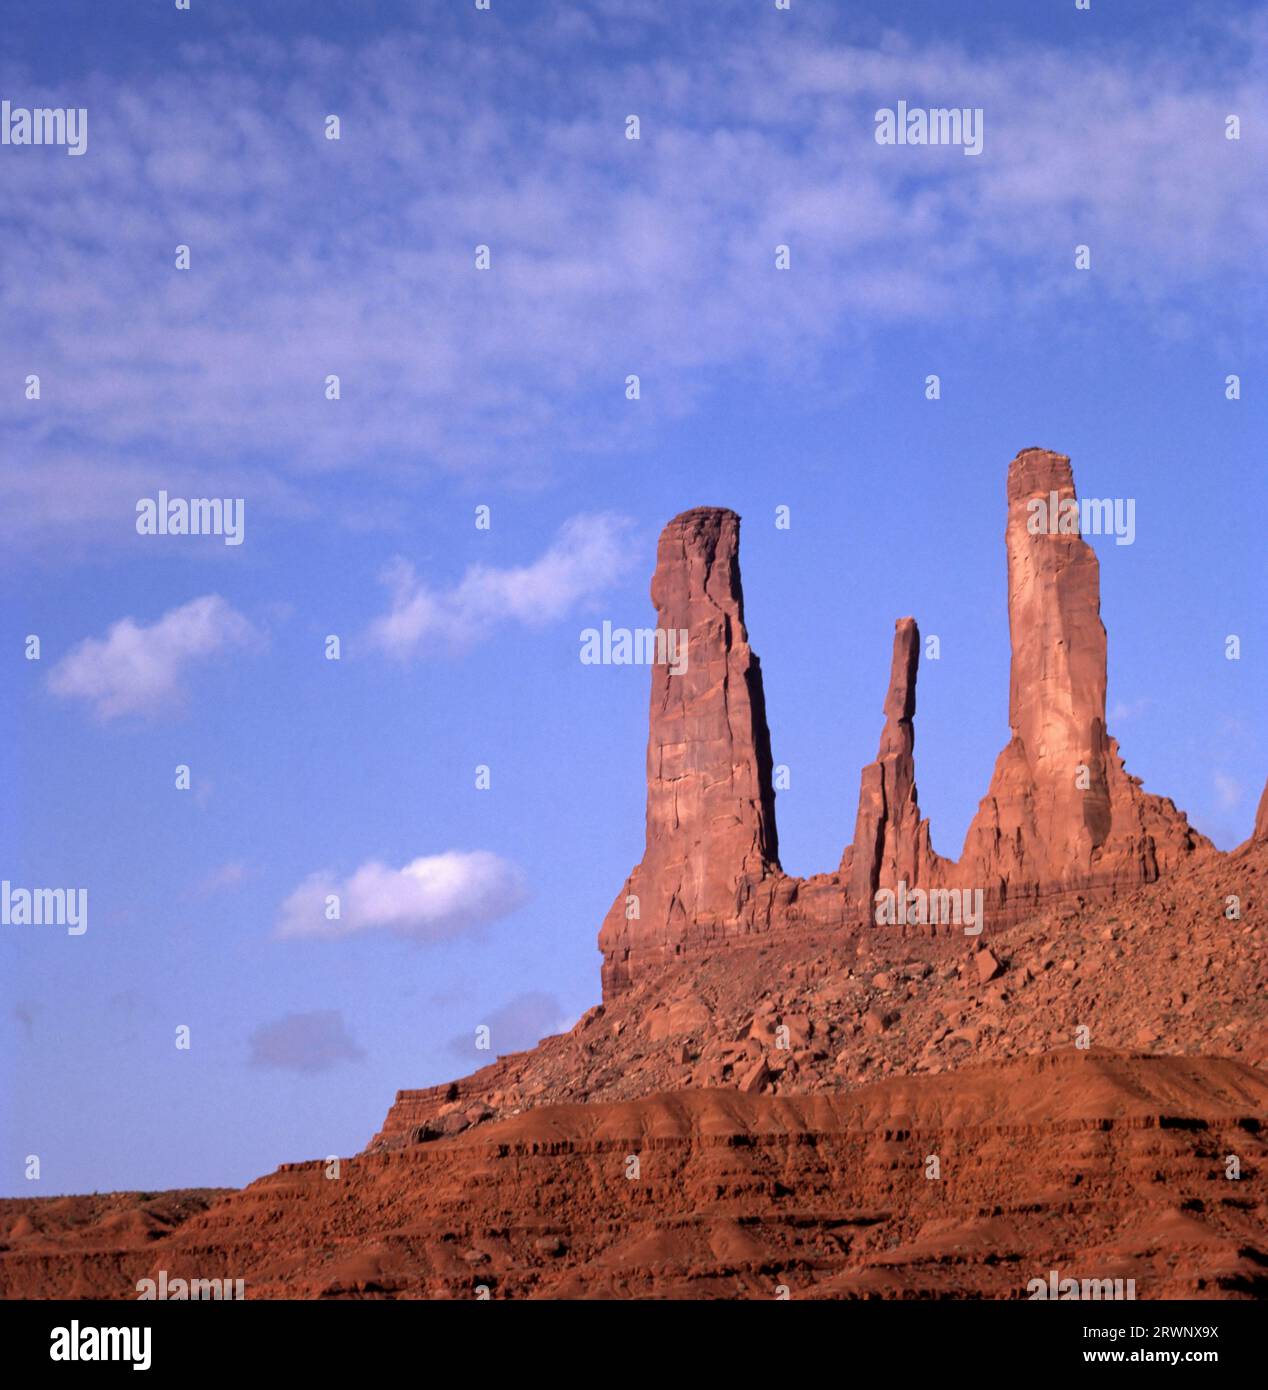 The Three Sisters rock formation, Monument Valley Navajo Tribal Park Stock Photo